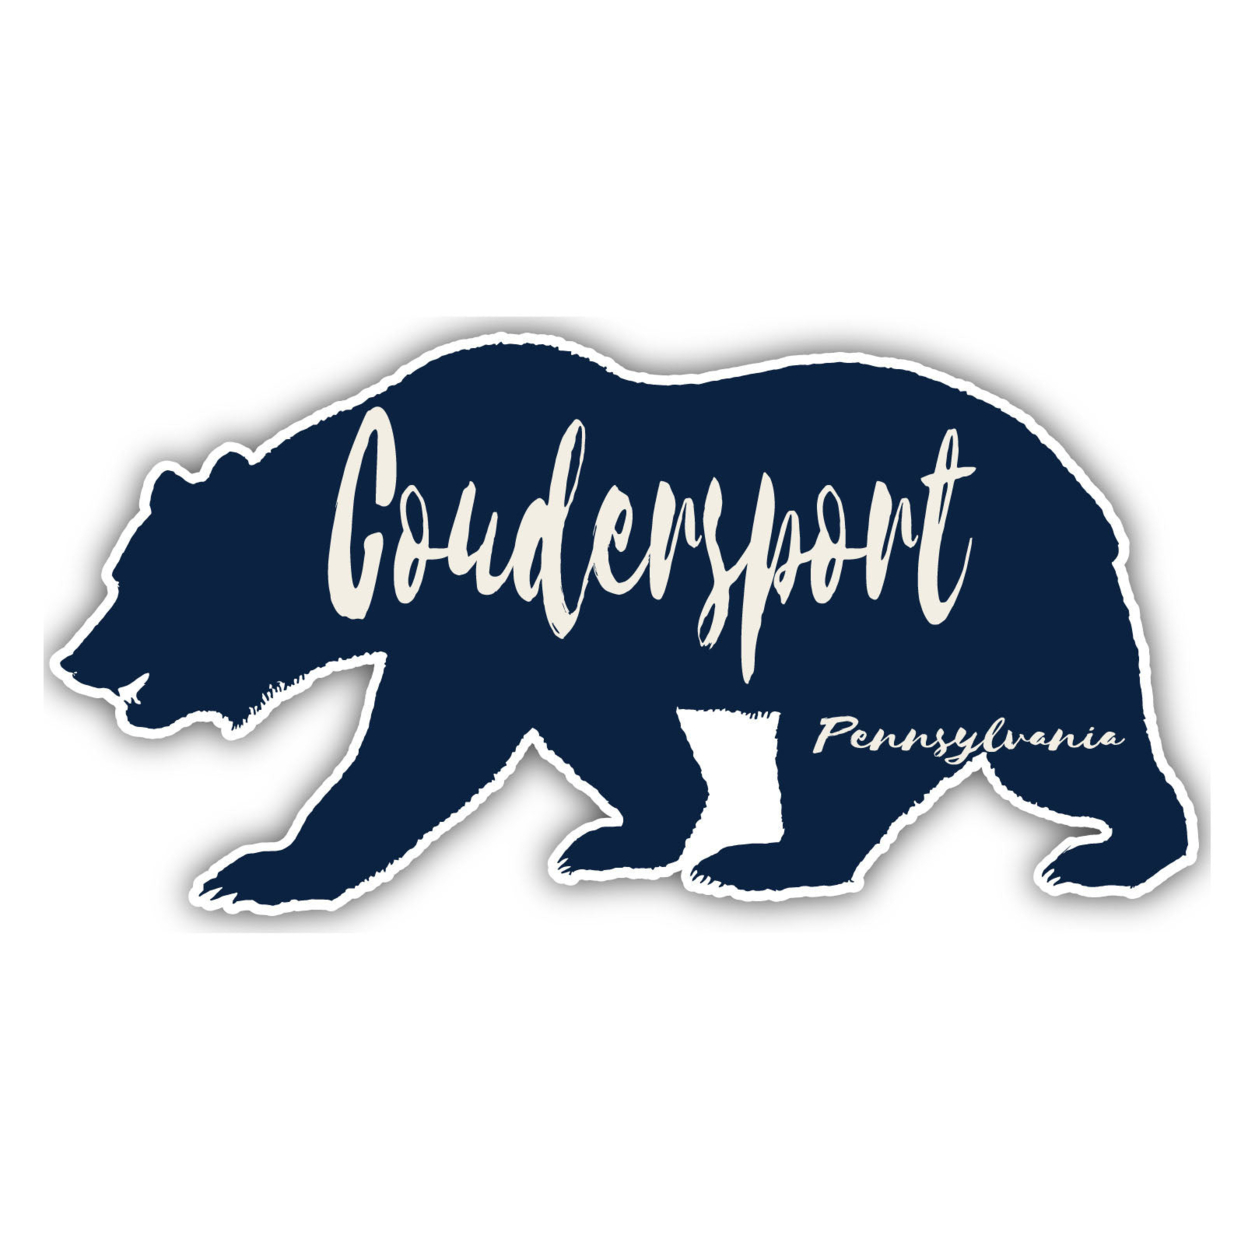 Coudersport Pennsylvania Souvenir Decorative Stickers (Choose Theme And Size) - 4-Pack, 12-Inch, Bear